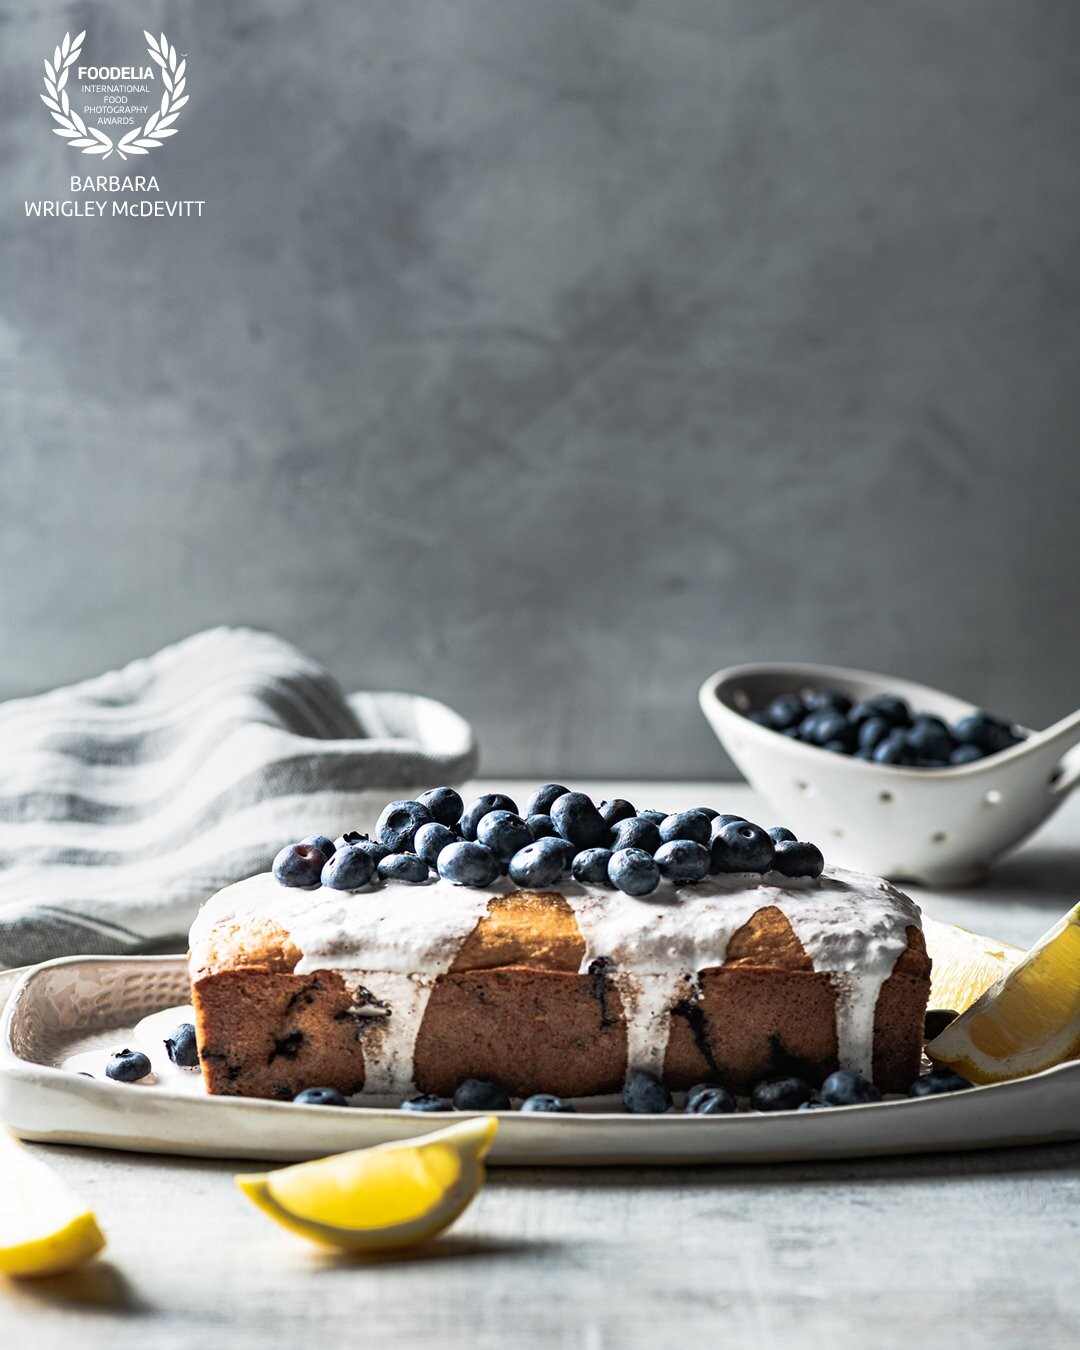 There really is nothing better than blueberry lemon pound cake for a sweet treat.<br />
<br />
Shot with a Nikon D850, 105mm lens and a Profoto B-1 with white umbrella.